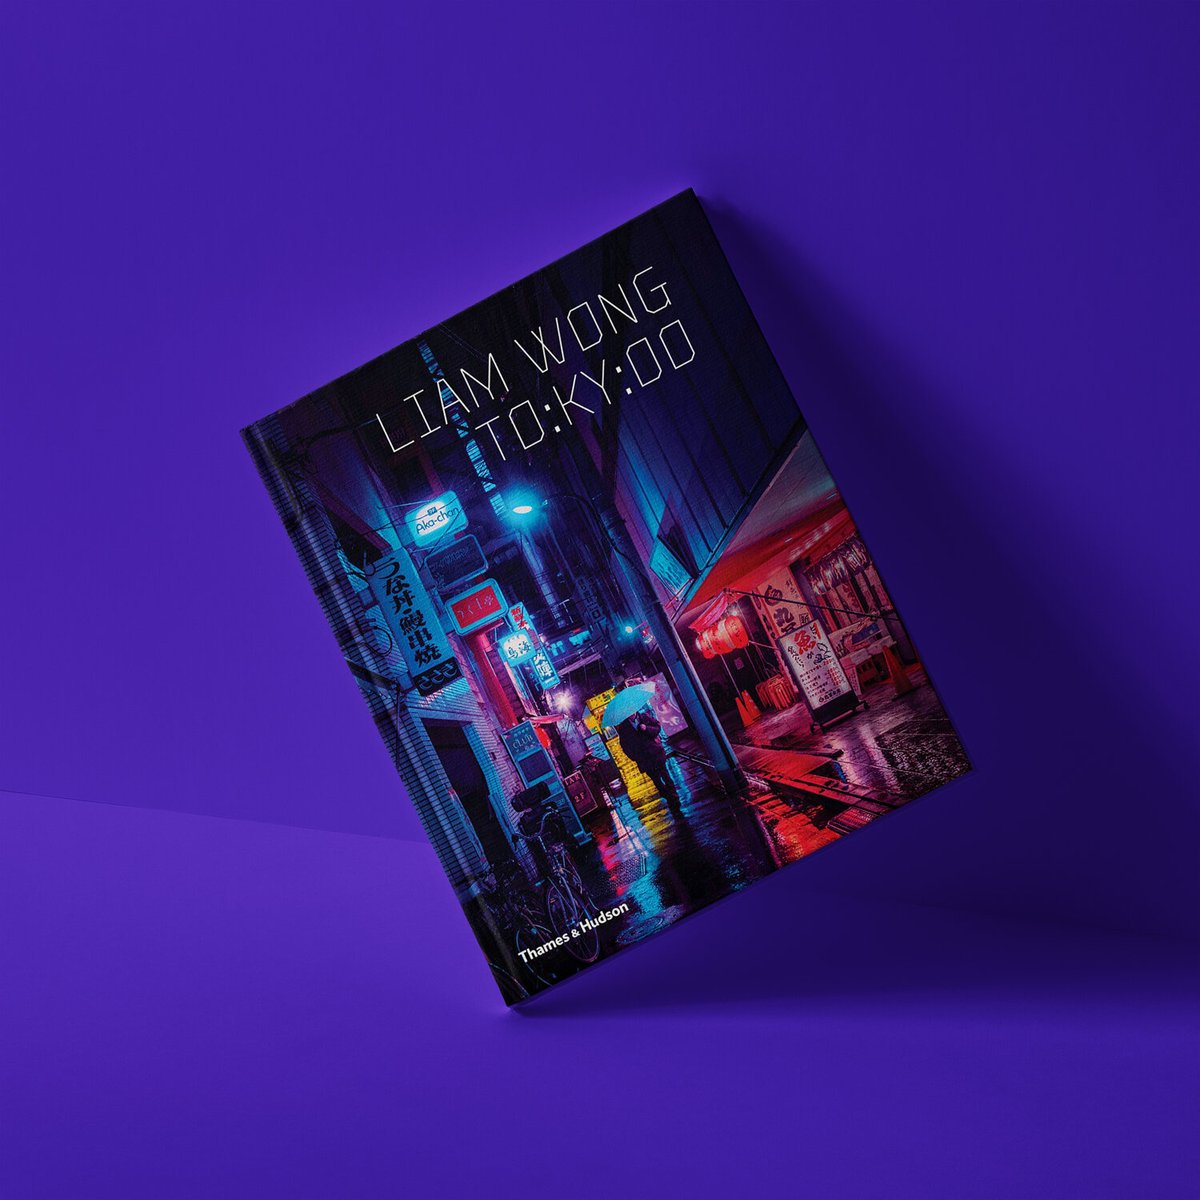 A photograph of the book, TO:KY:OO, capturing the beauty of Tokyo at night. The image on the cover is the first image in this post. It has a purple background and the book is angled.